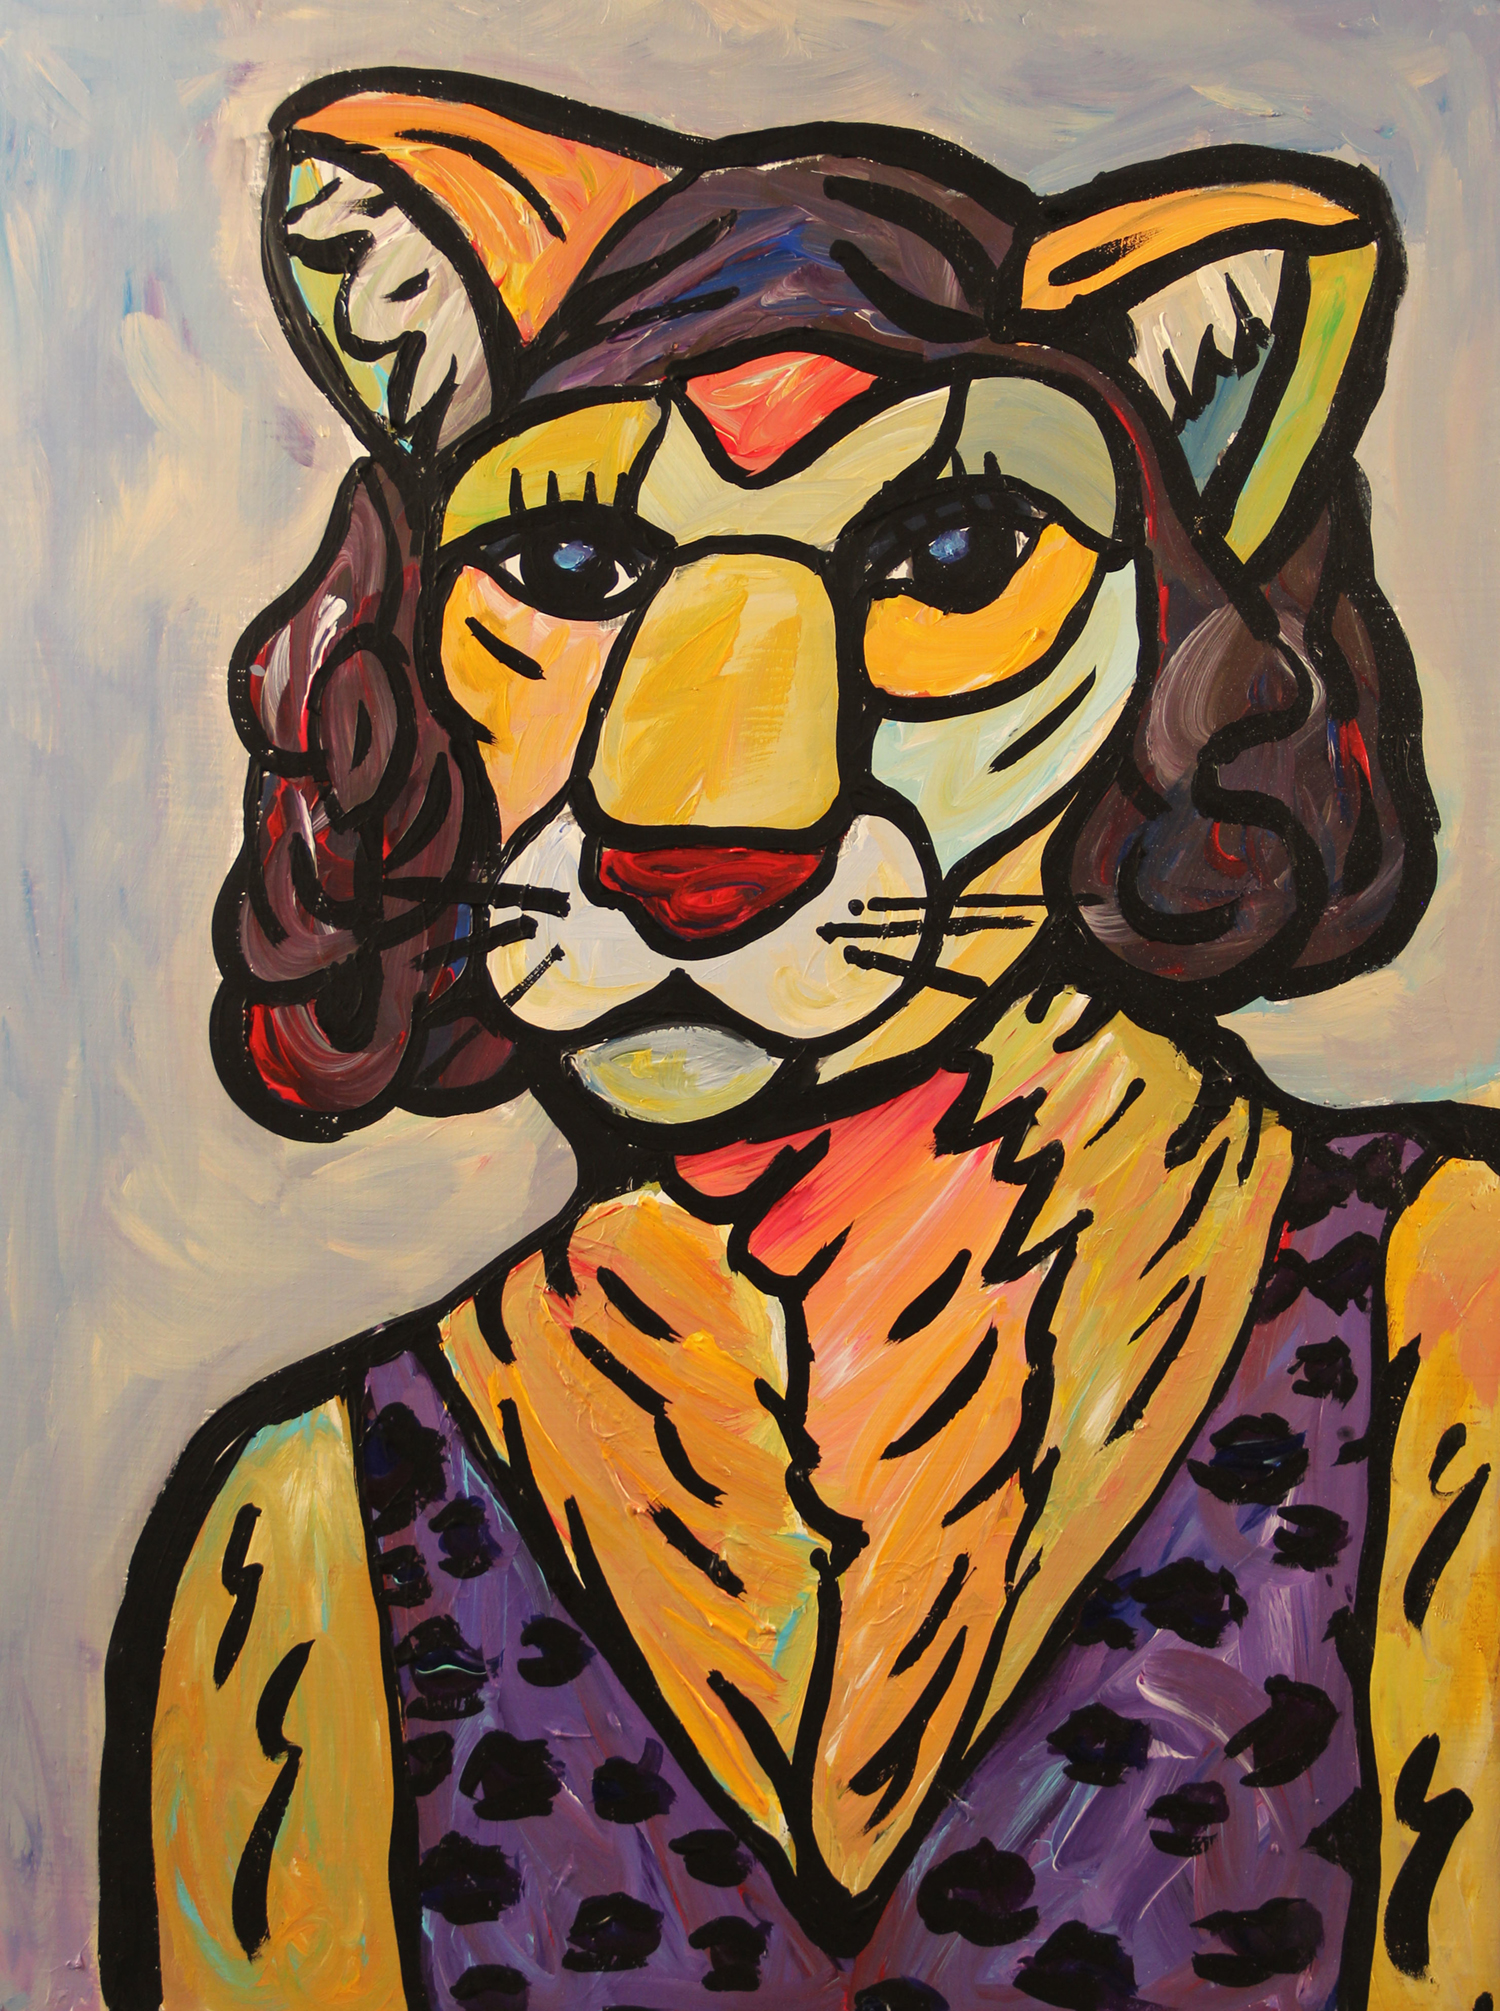 A cougar in a wig and purple dress. Painting by Courtney Huston